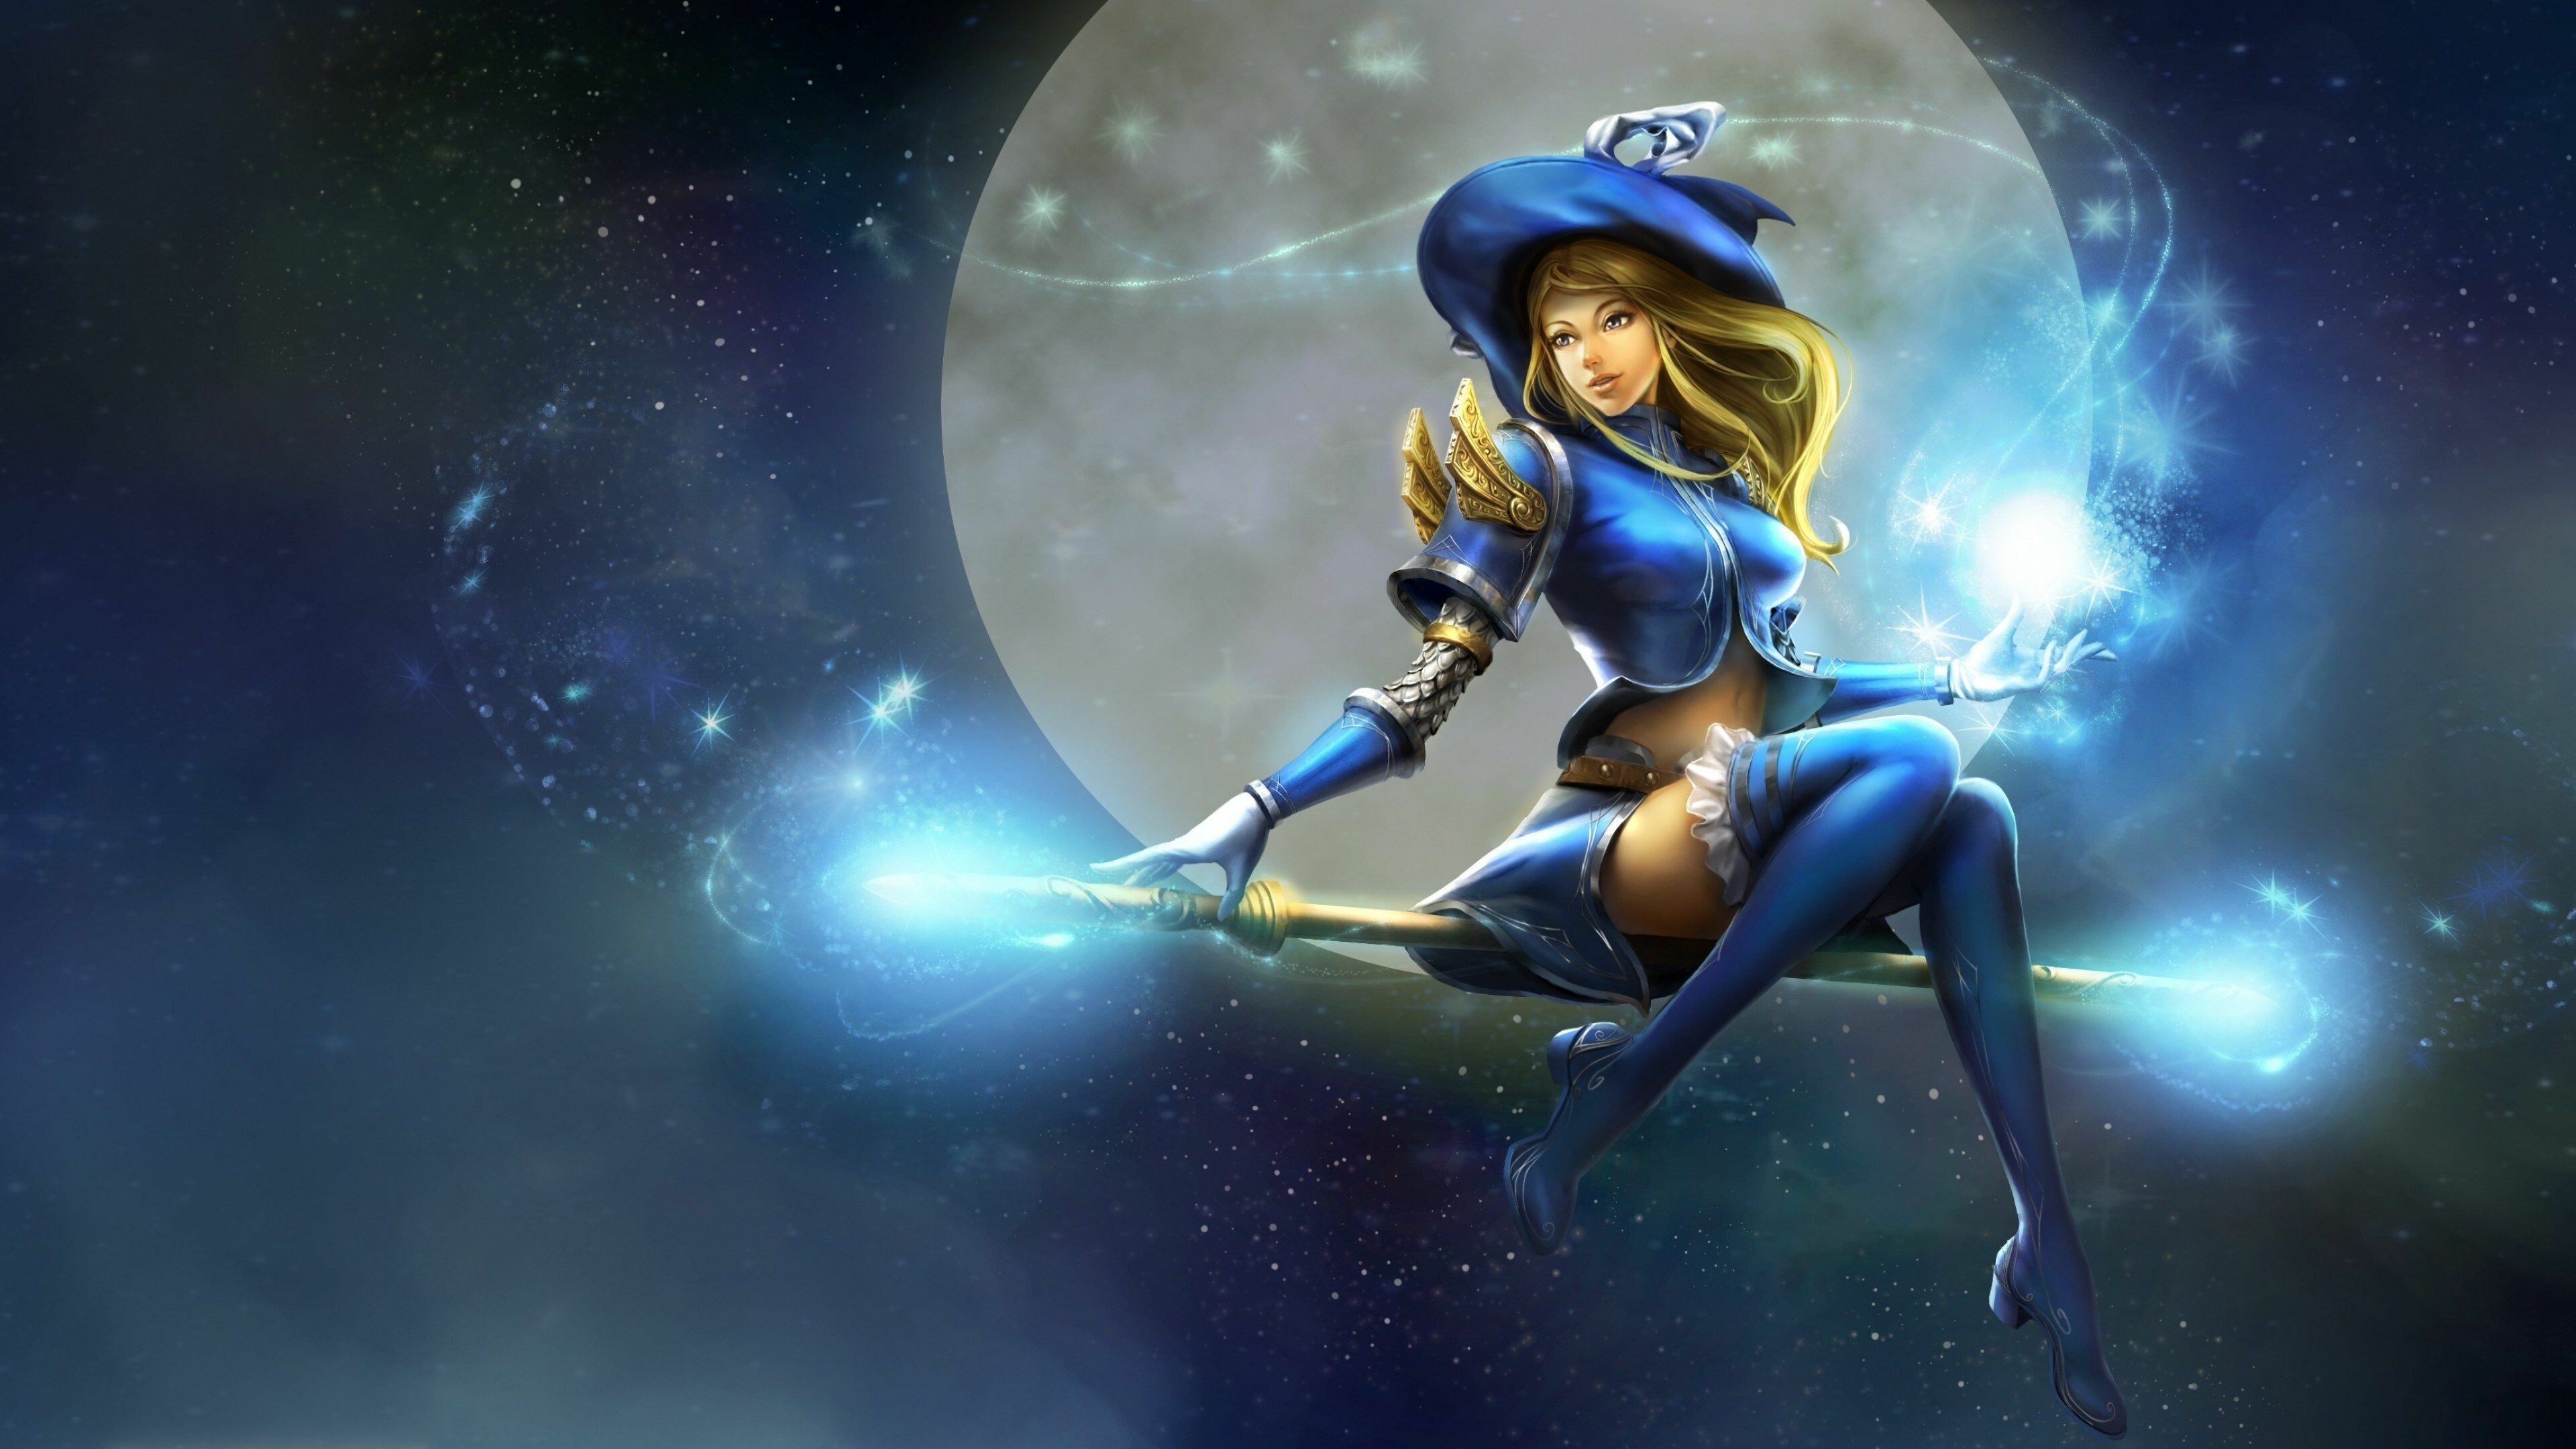 League of Legends 4K awesome wallpaper, Witches broomsticks, Halloween witch, 3840x2160 4K Desktop